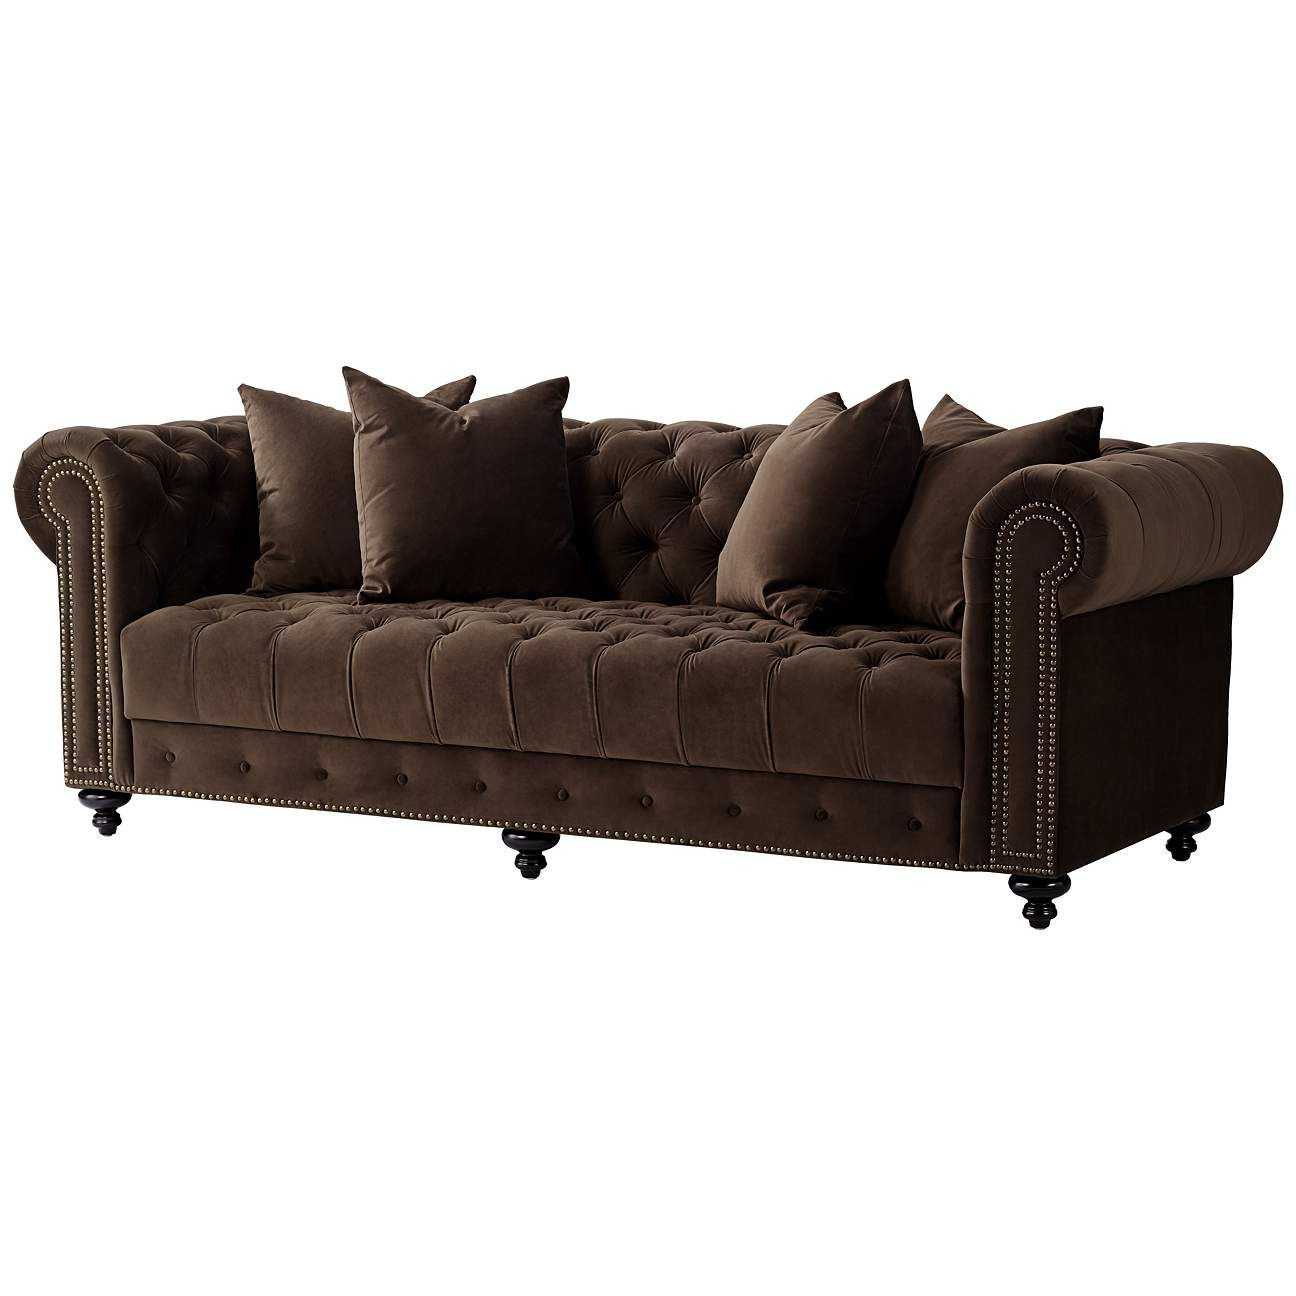 Jules 90"w Chocolate Brown Velvet Tufted Chesterfield Sofa – #58j03 Inside Sofas In Chocolate Brown (Gallery 3 of 20)